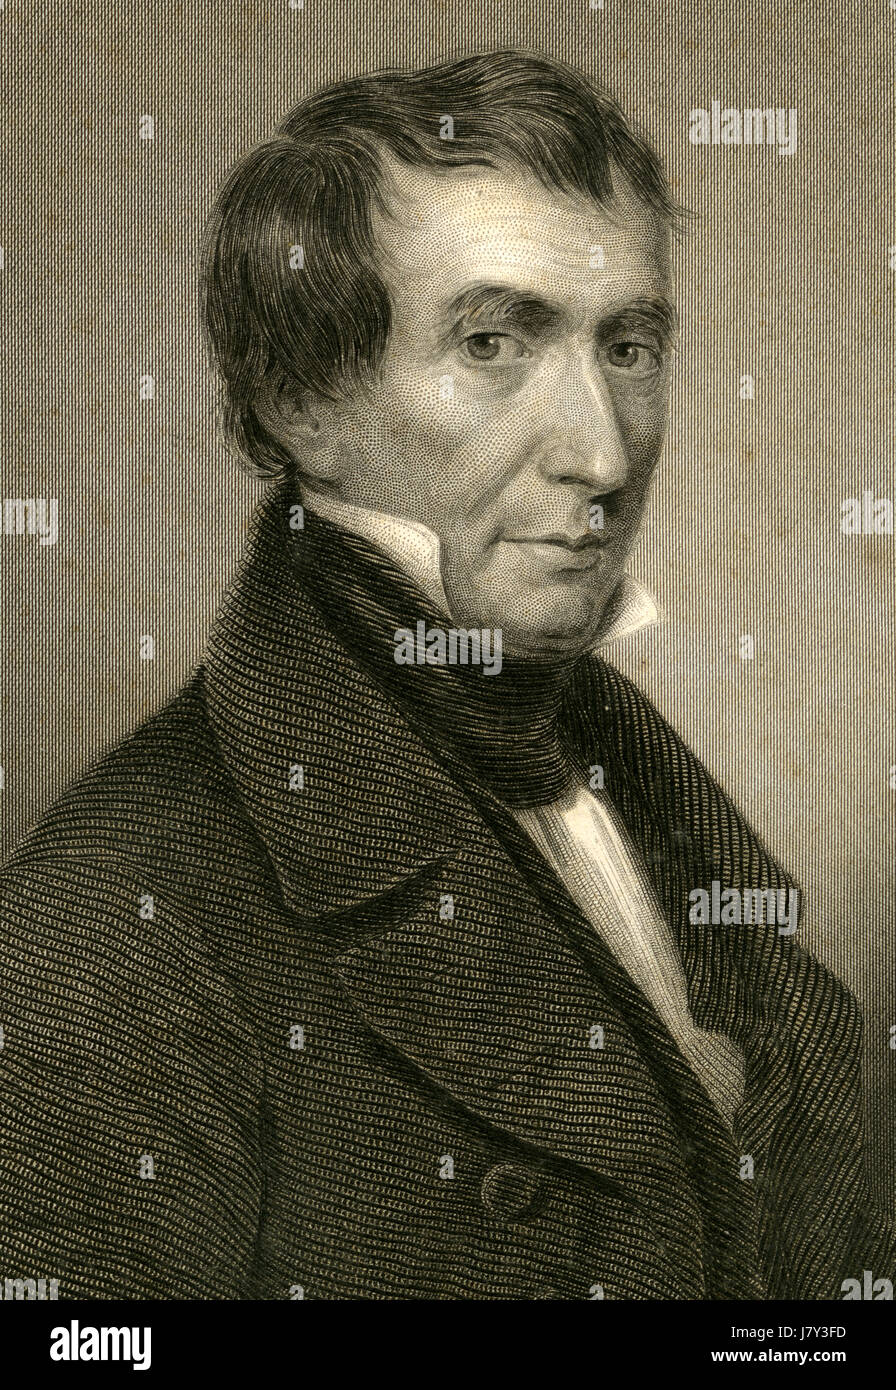 Antique c1860 engraving, William Henry Harrison. William Henry Harrison Sr. (1773-1841) was the ninth President of the United States (1841), an American military officer, and the last president born as a British subject. SOURCE: ORIGINAL ENGRAVING. Stock Photo